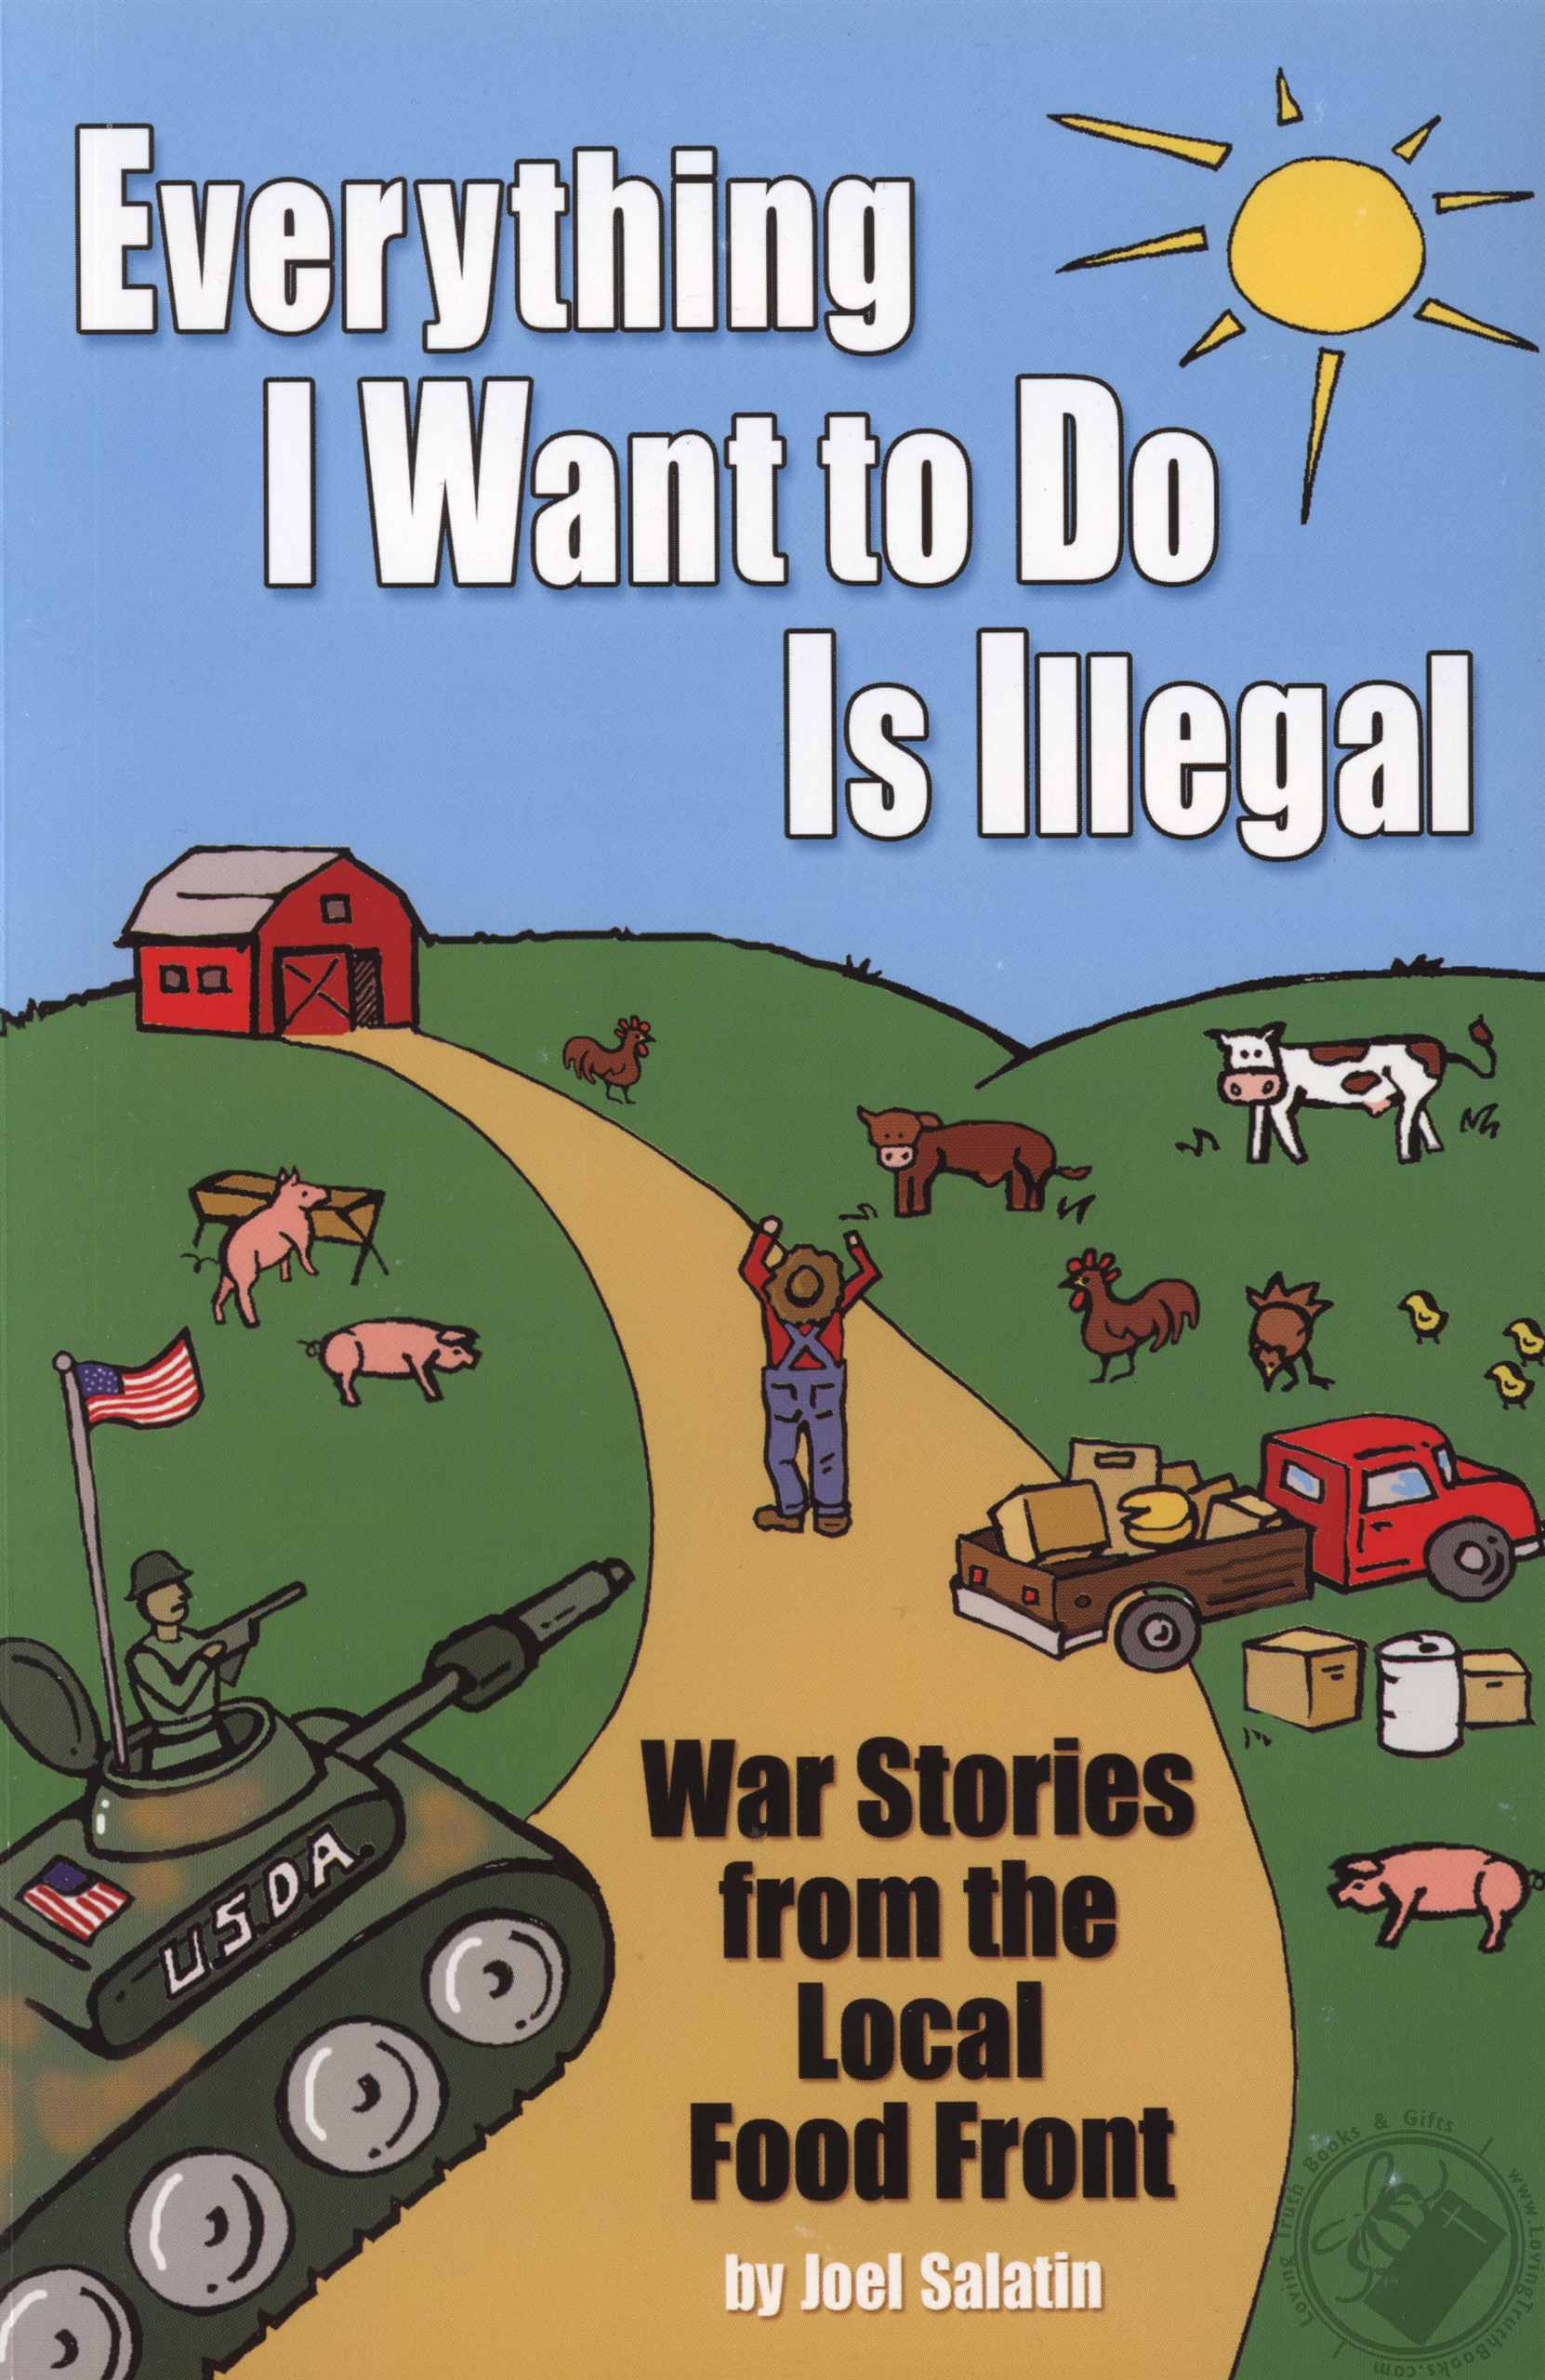 'Everything I Want To Do Is Illegal' by Joel Salatin